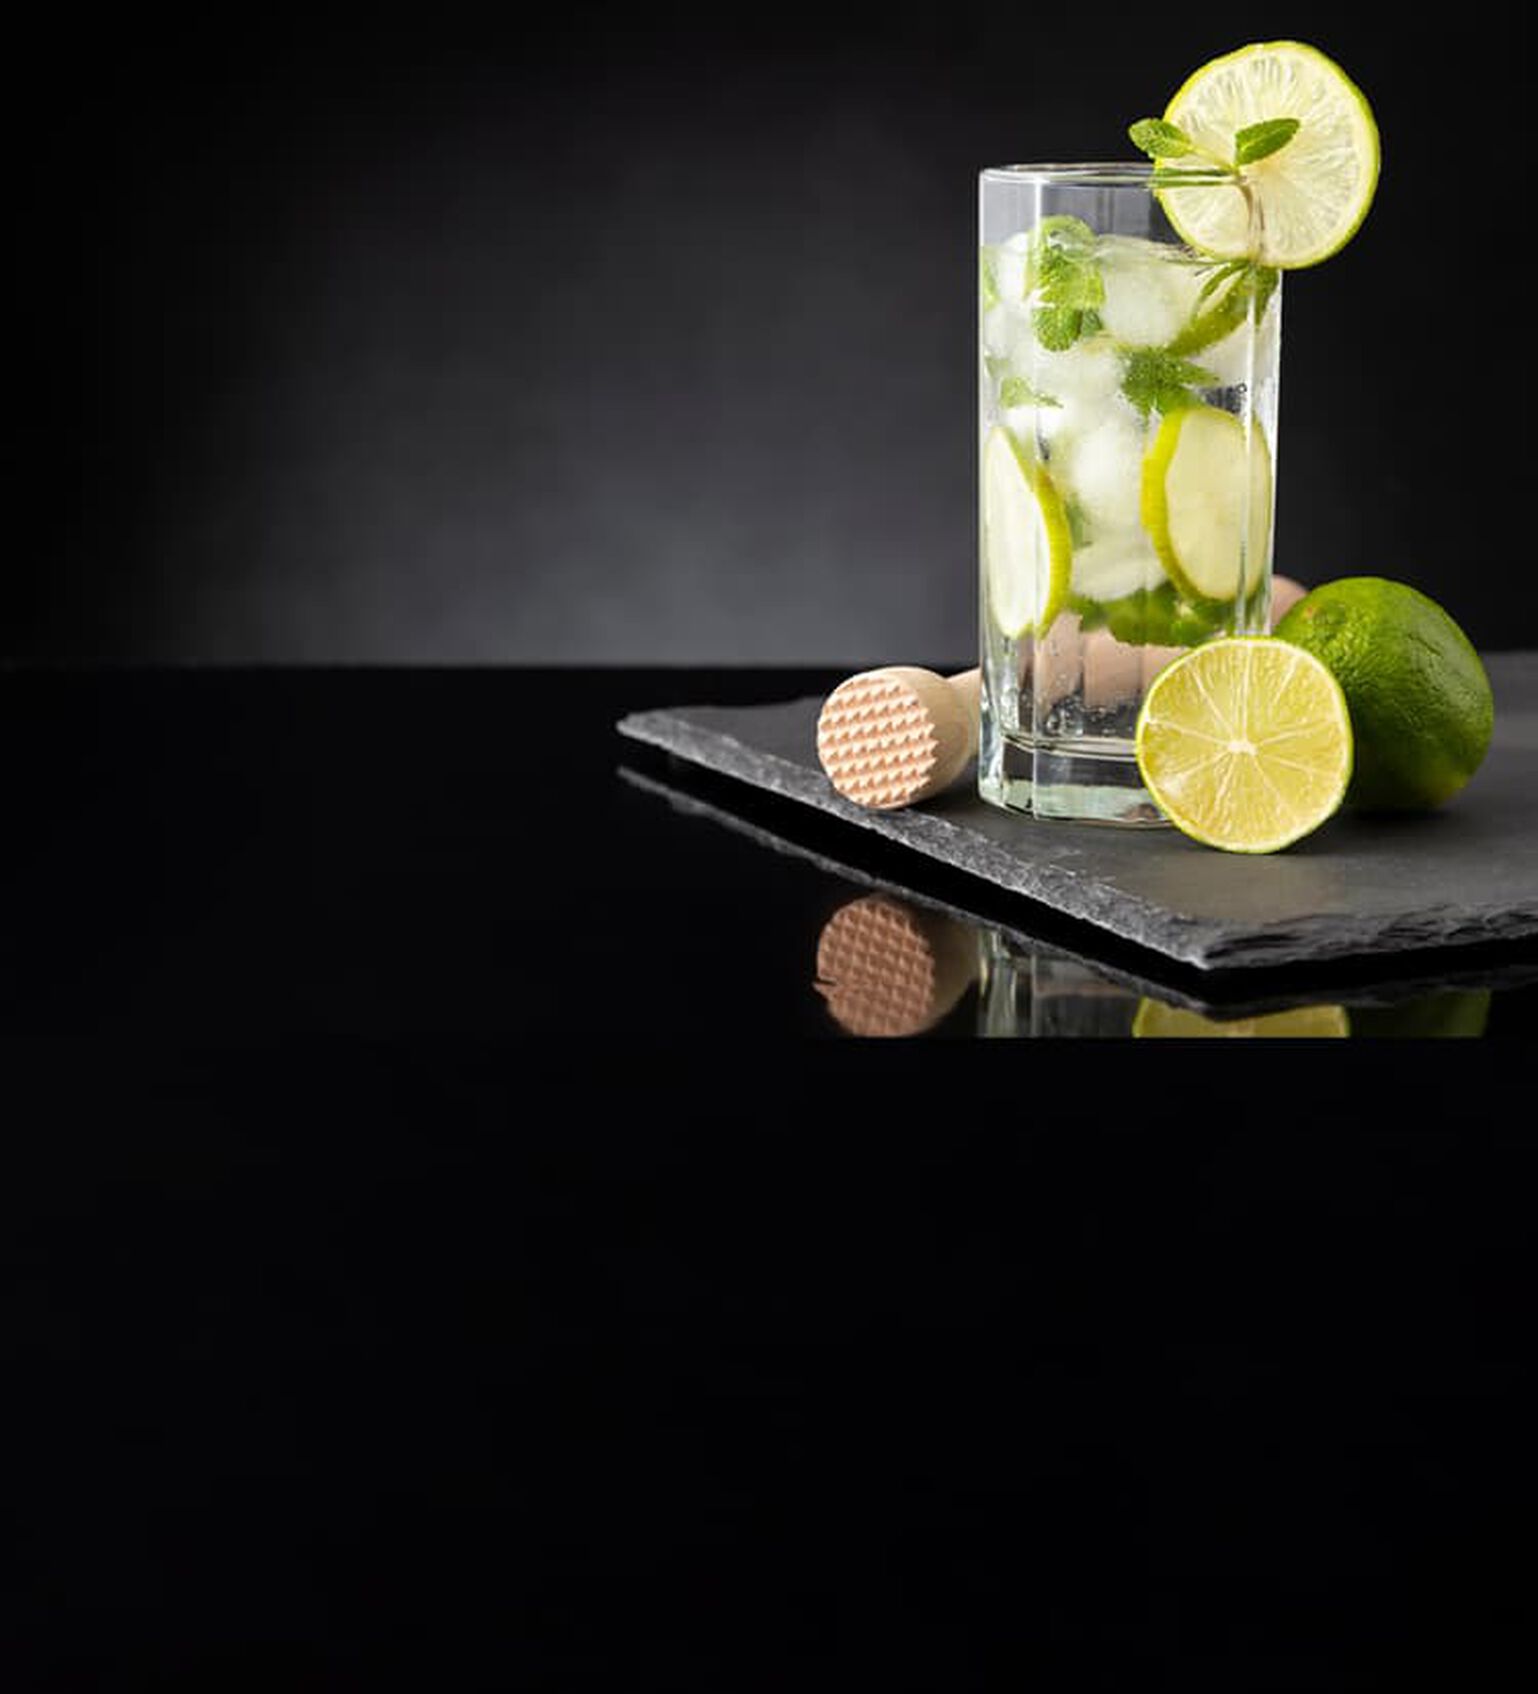 Image of a gin and tonic